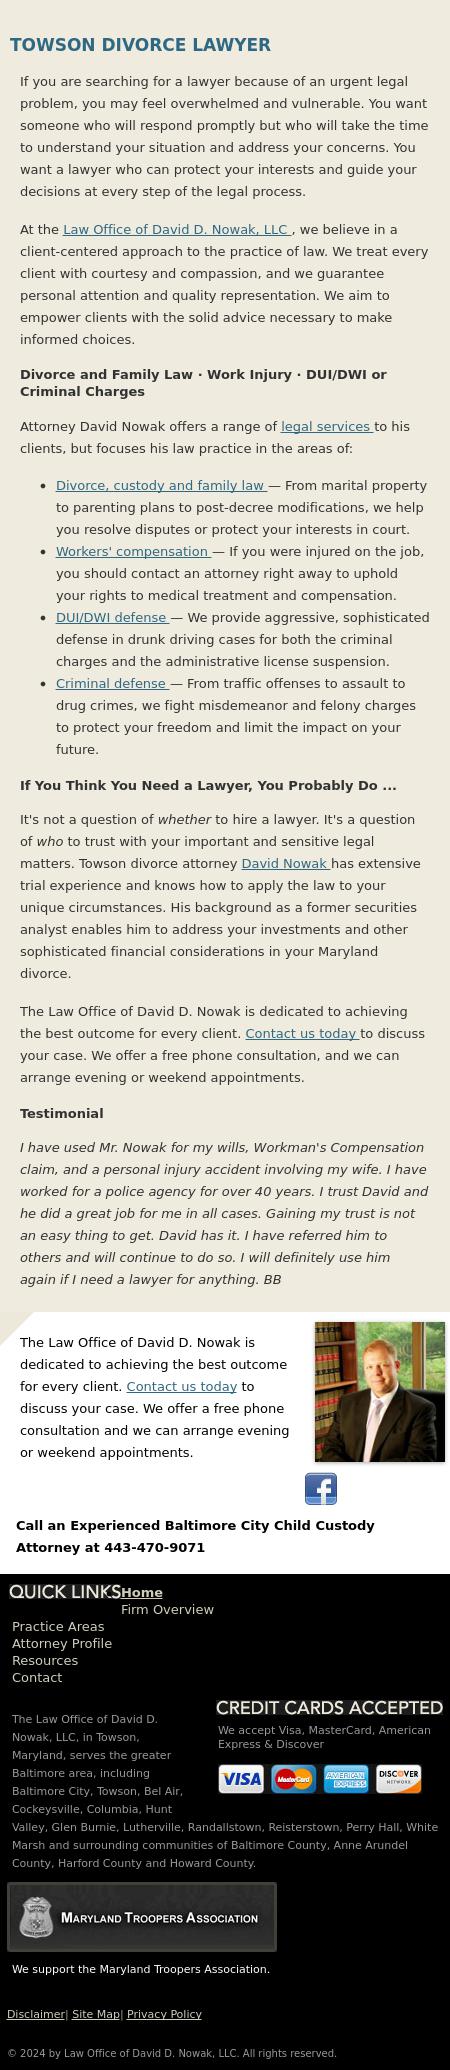 Law Office of David D. Nowak, LLC - Towson MD Lawyers